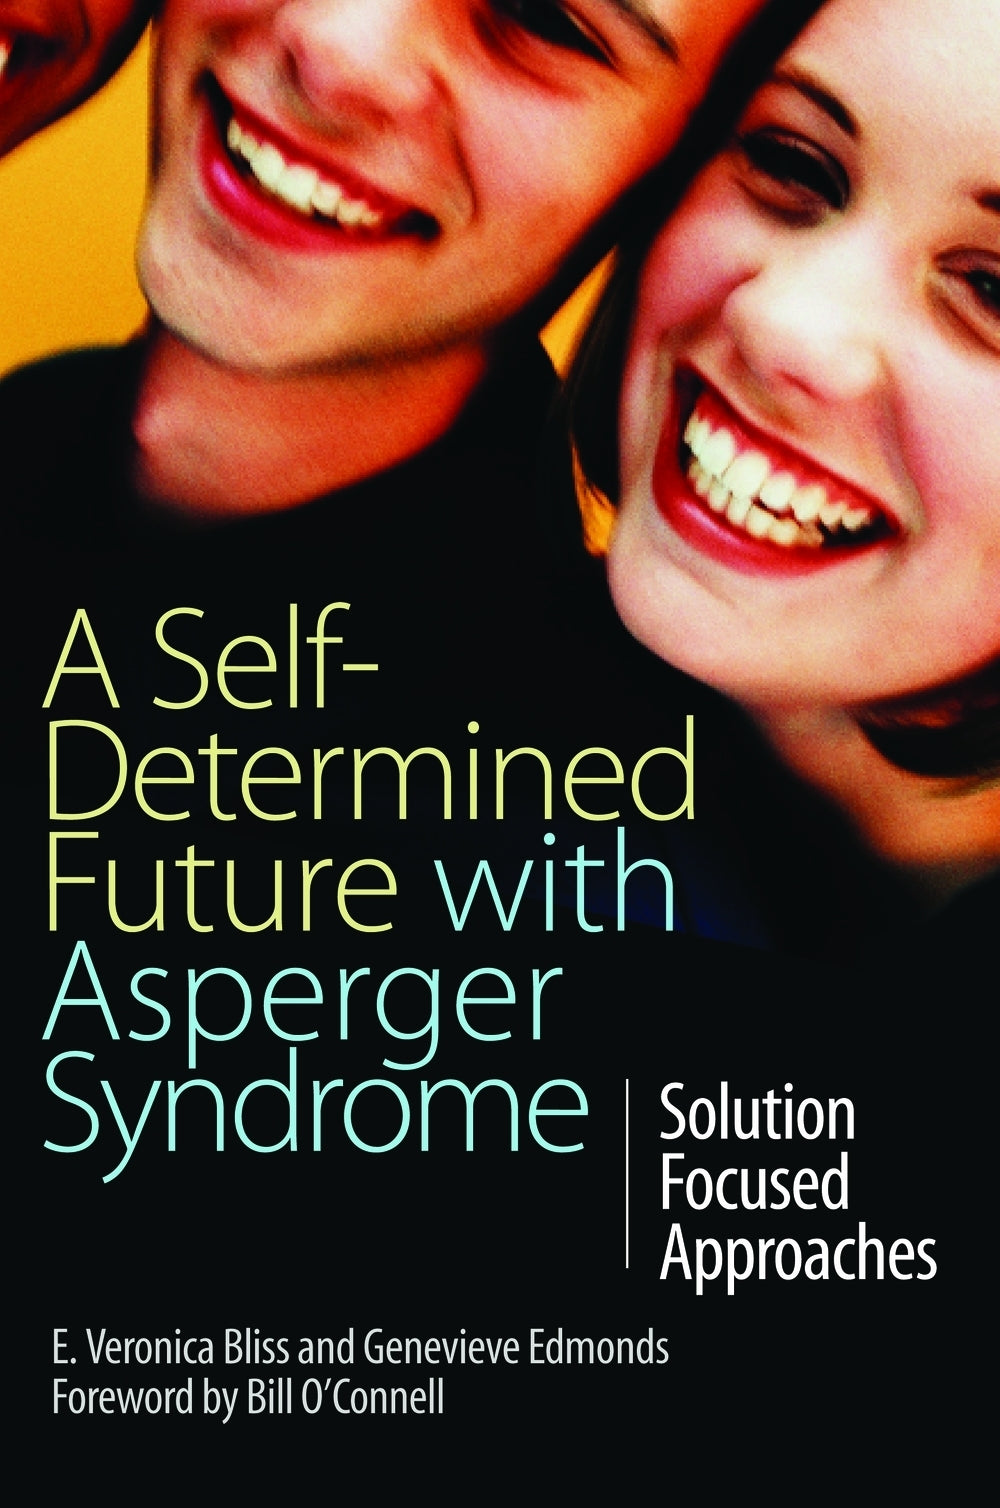 A Self-Determined Future with Asperger Syndrome by Bill O'Connell, E Veronica Bliss, Genevieve Edmonds